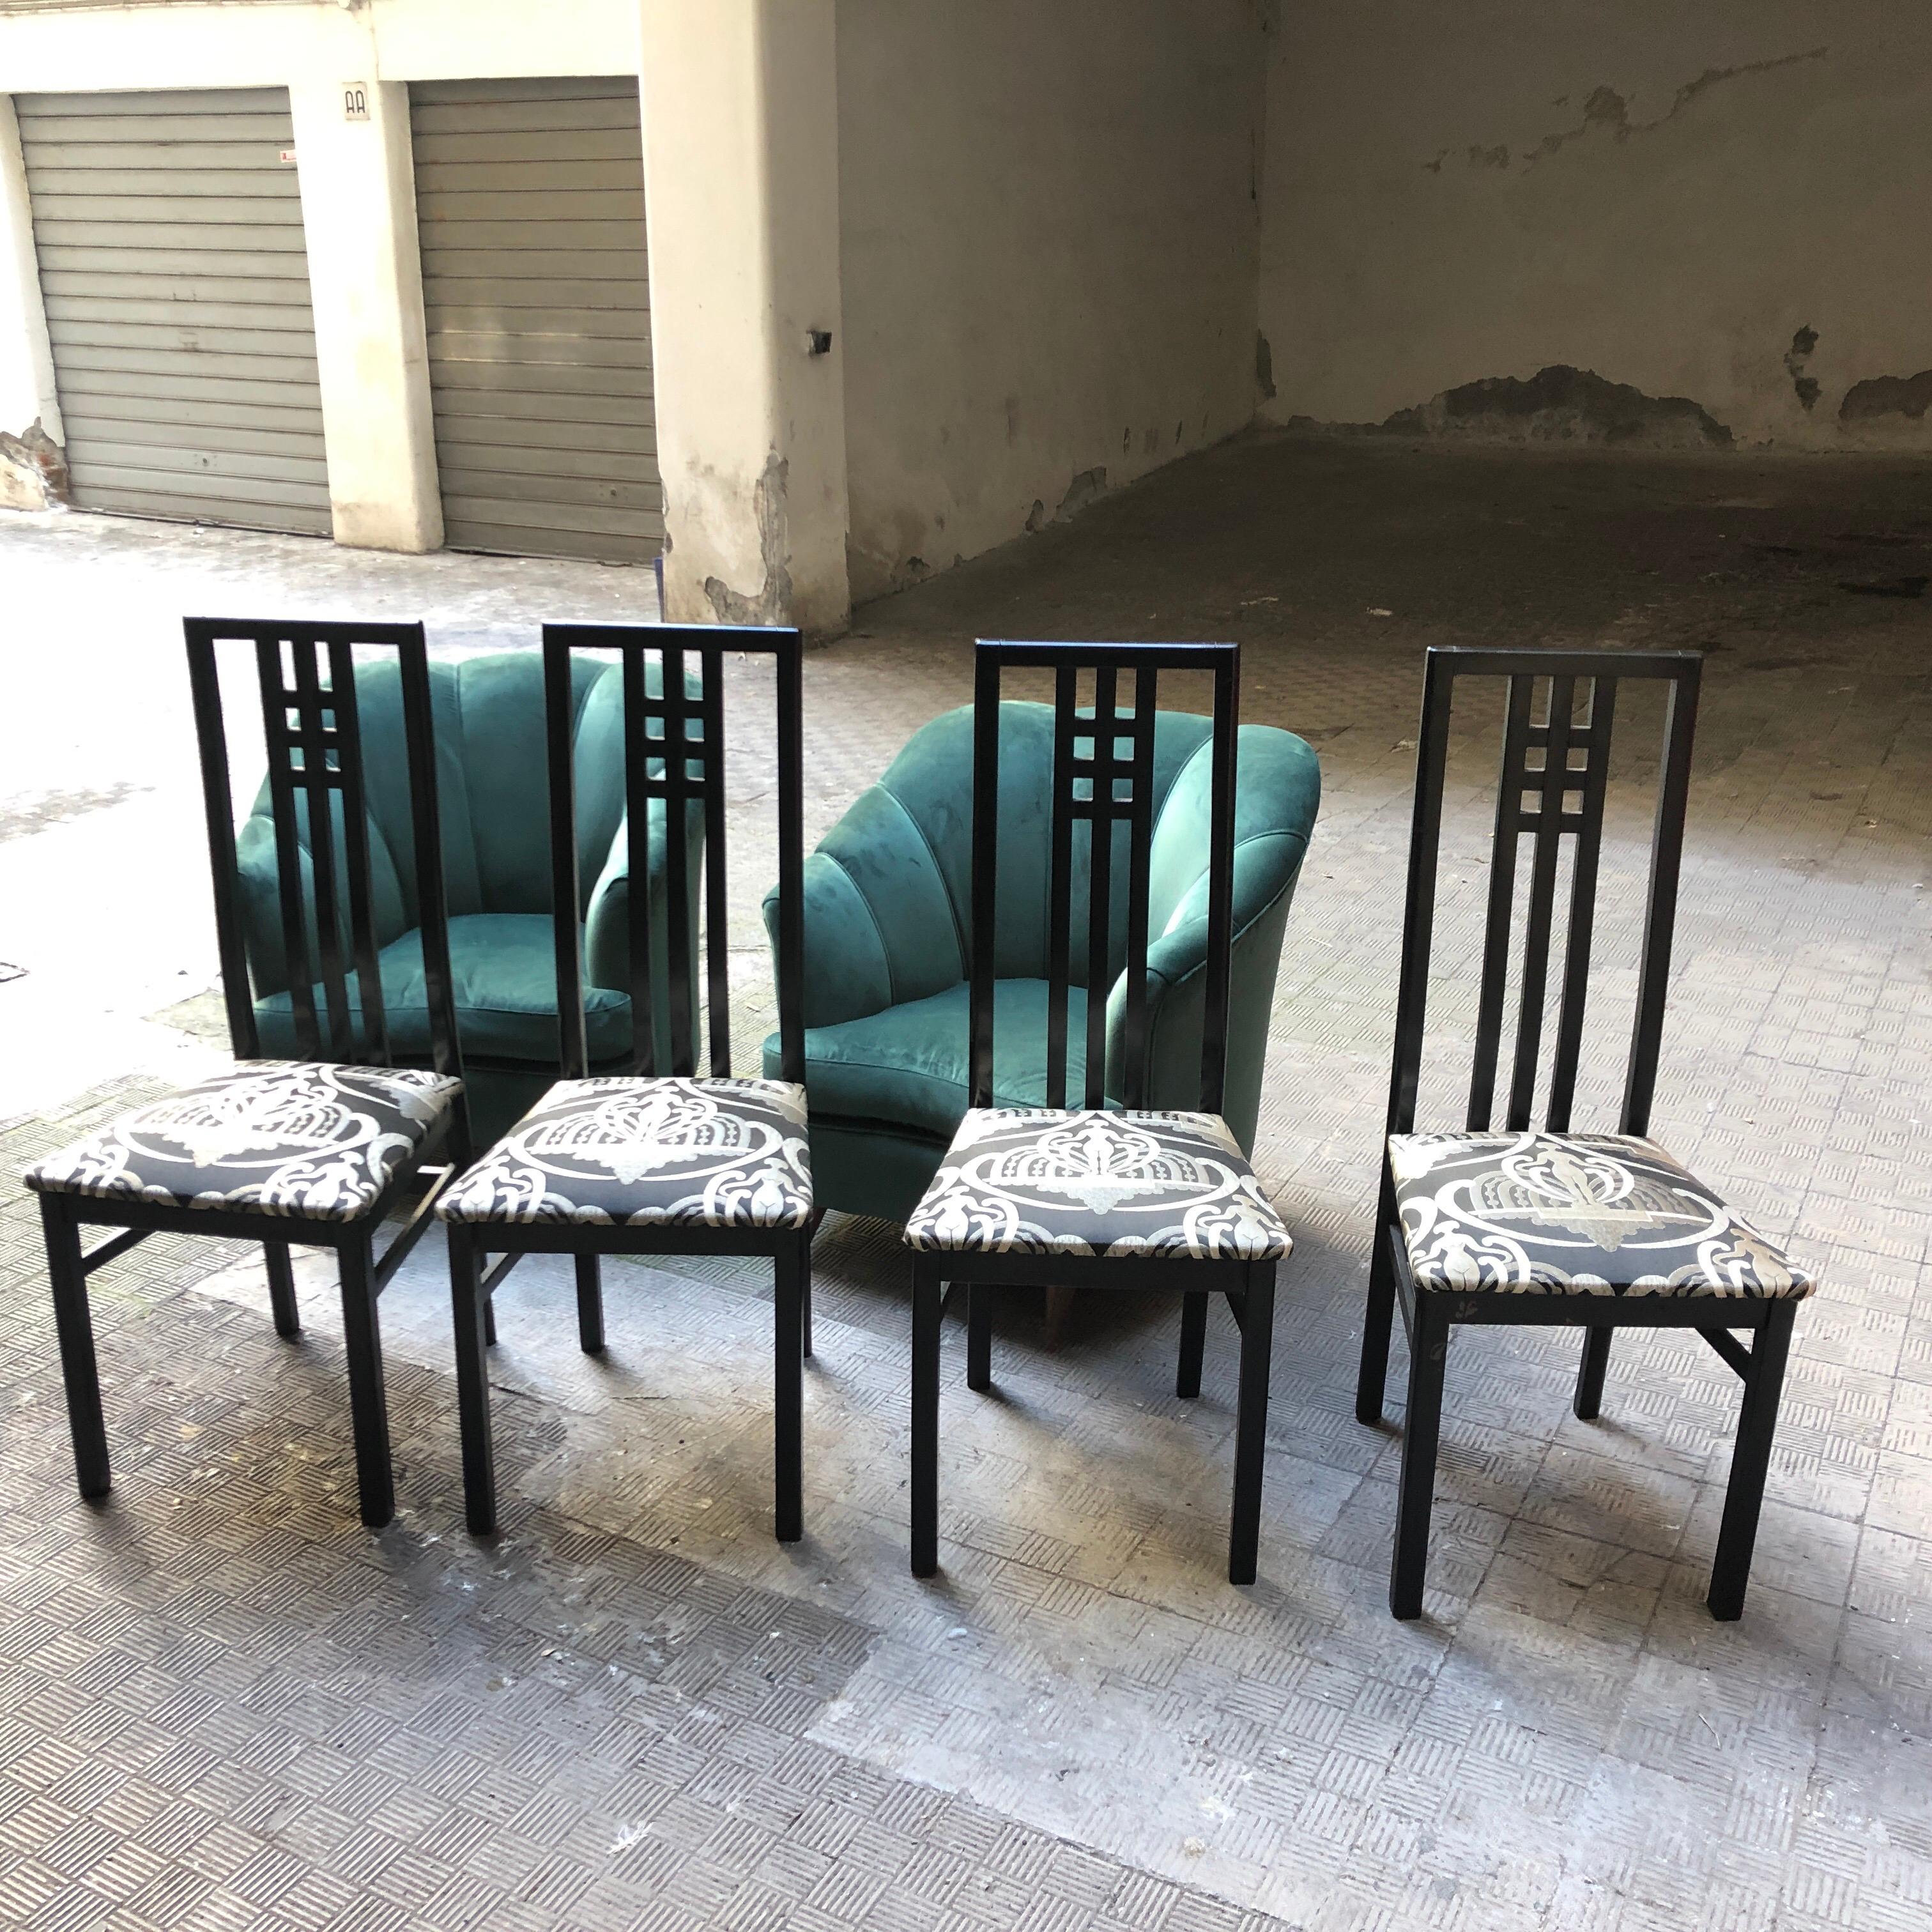 Four ebonized dining chairs, upholstered with a black and white Pierre Frey tissue. They are made in Italy in the 1970s.